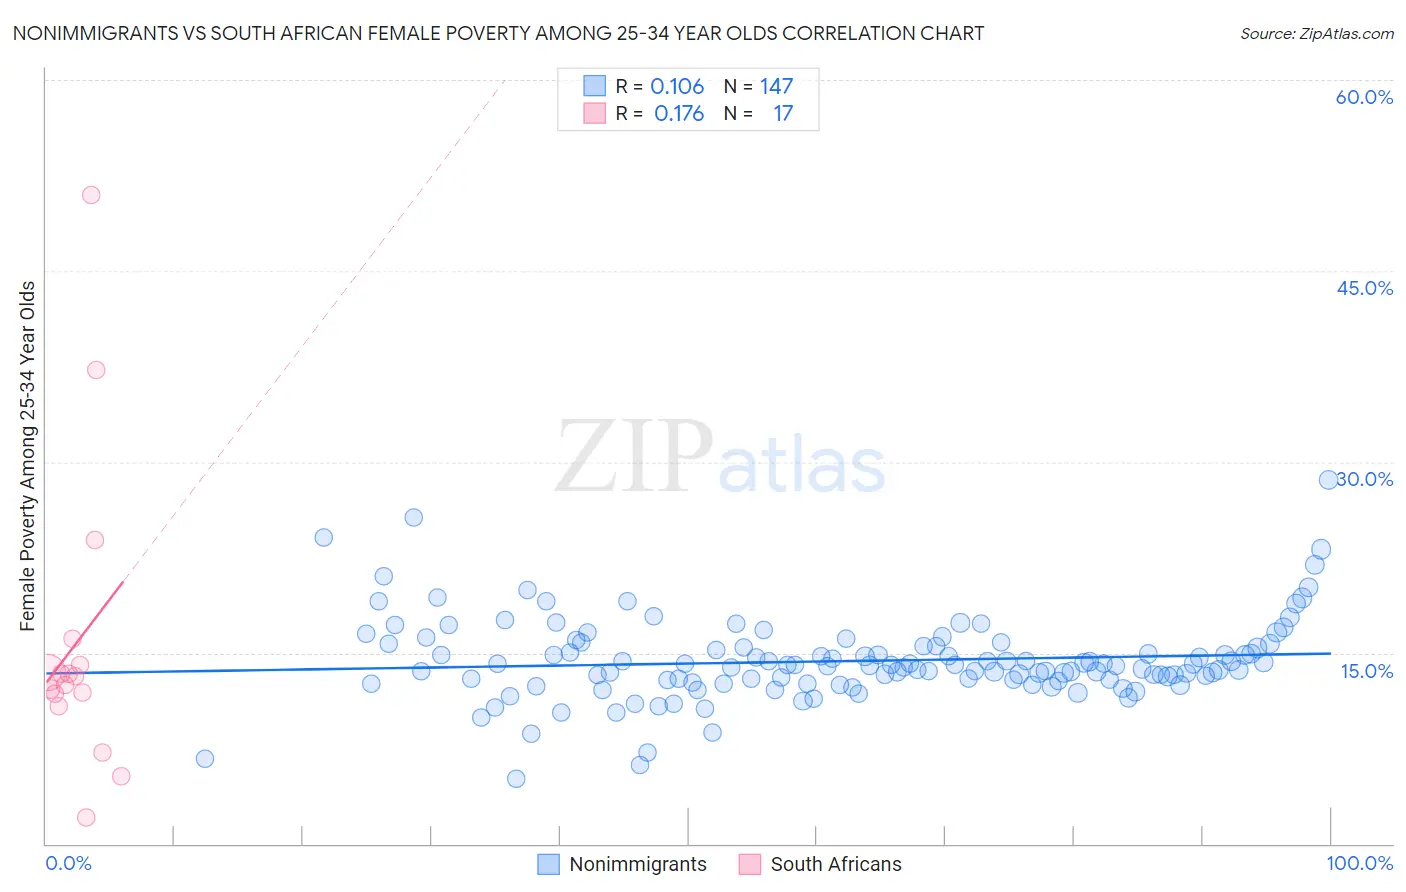 Nonimmigrants vs South African Female Poverty Among 25-34 Year Olds